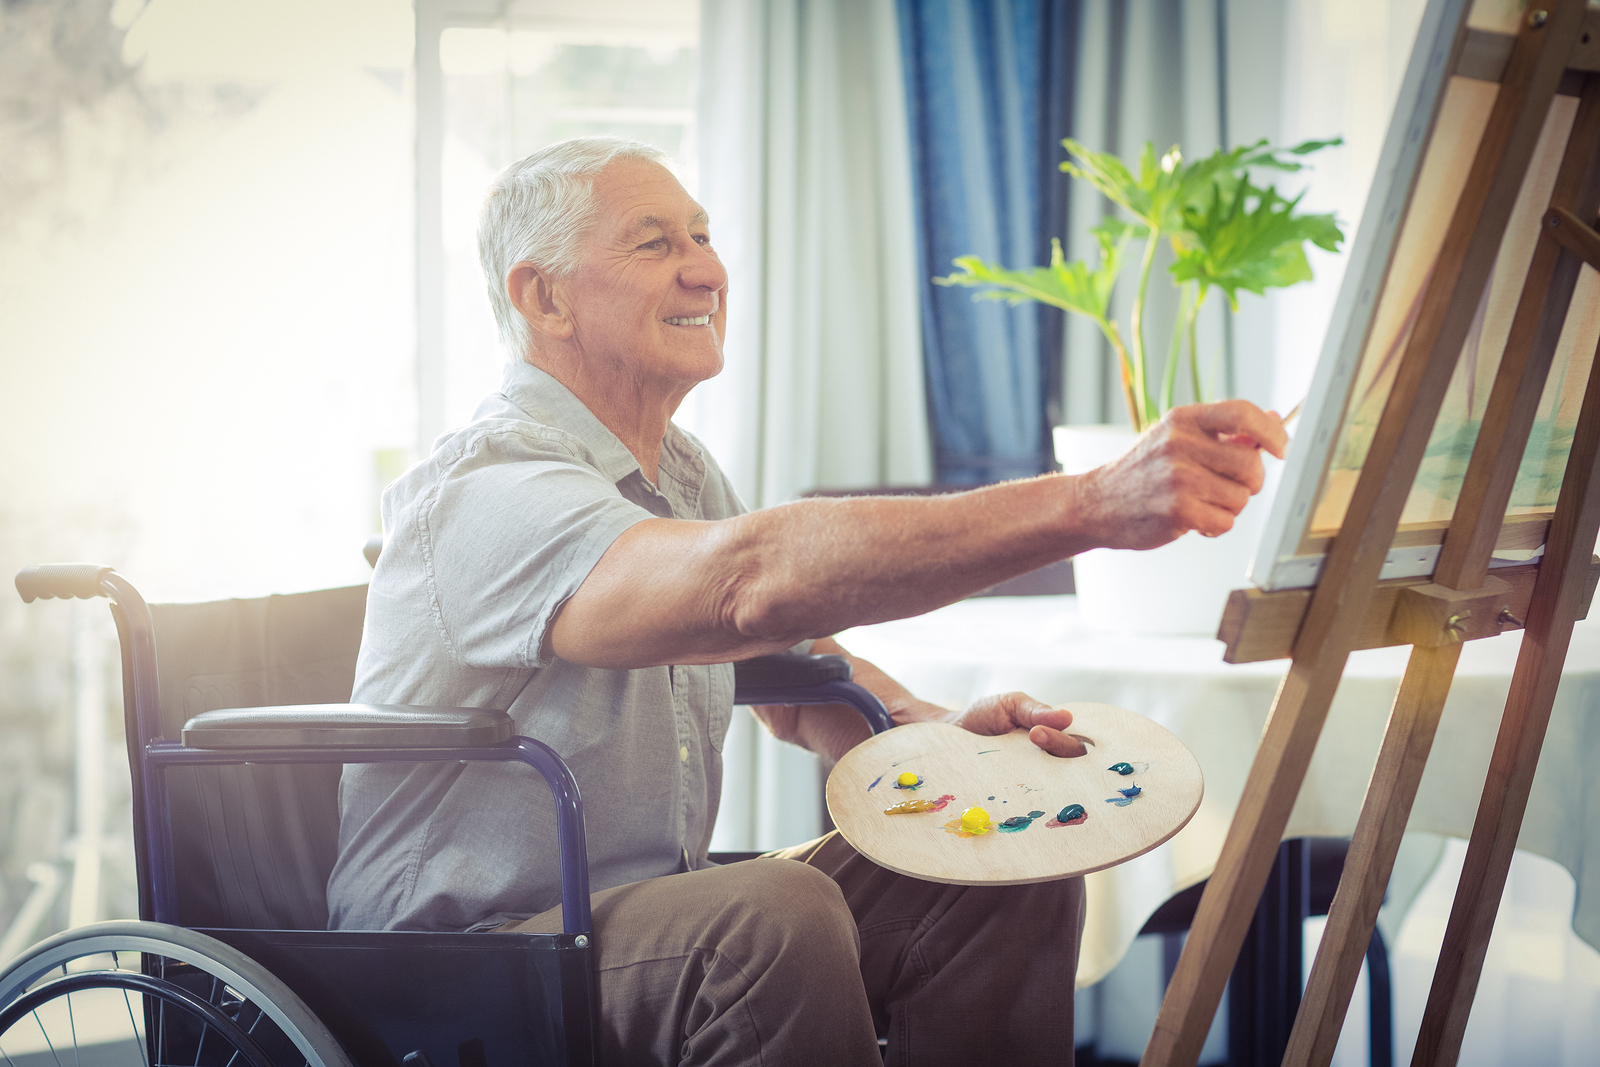 Seven Creative Activities for Seniors with Limited Mobility